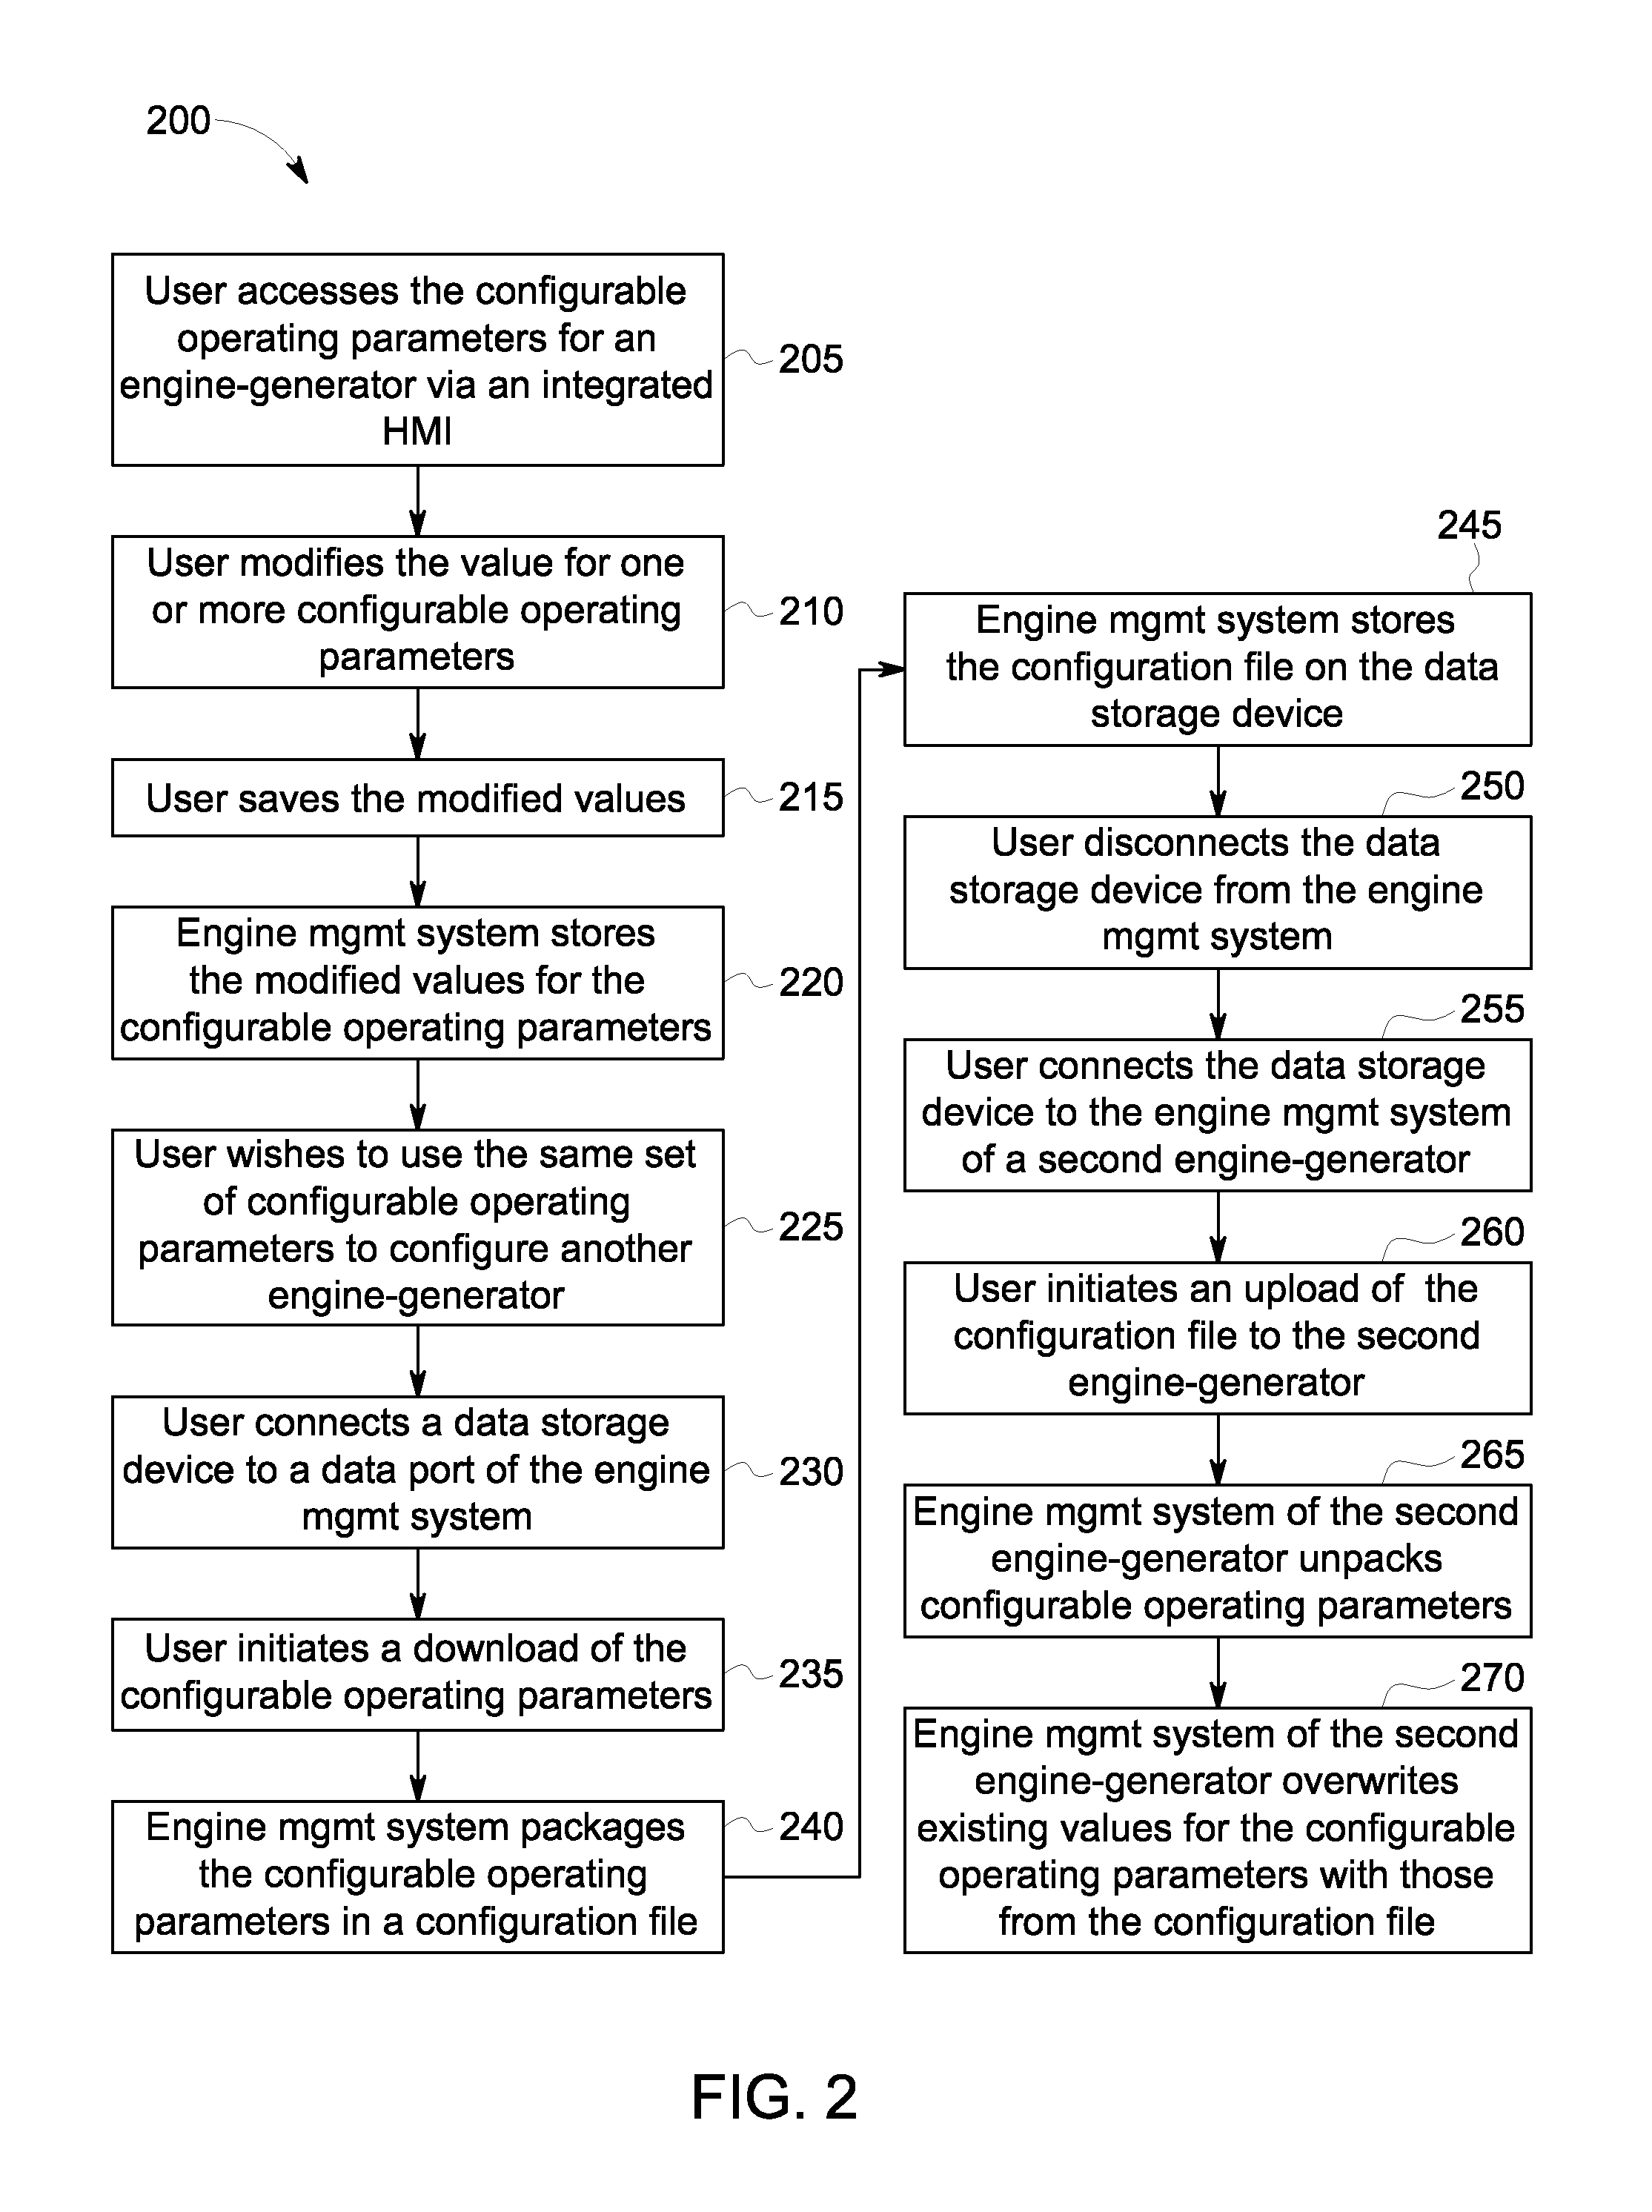 System, method, and computer program for an integrated human-machine interface (HMI) of an engine-generator